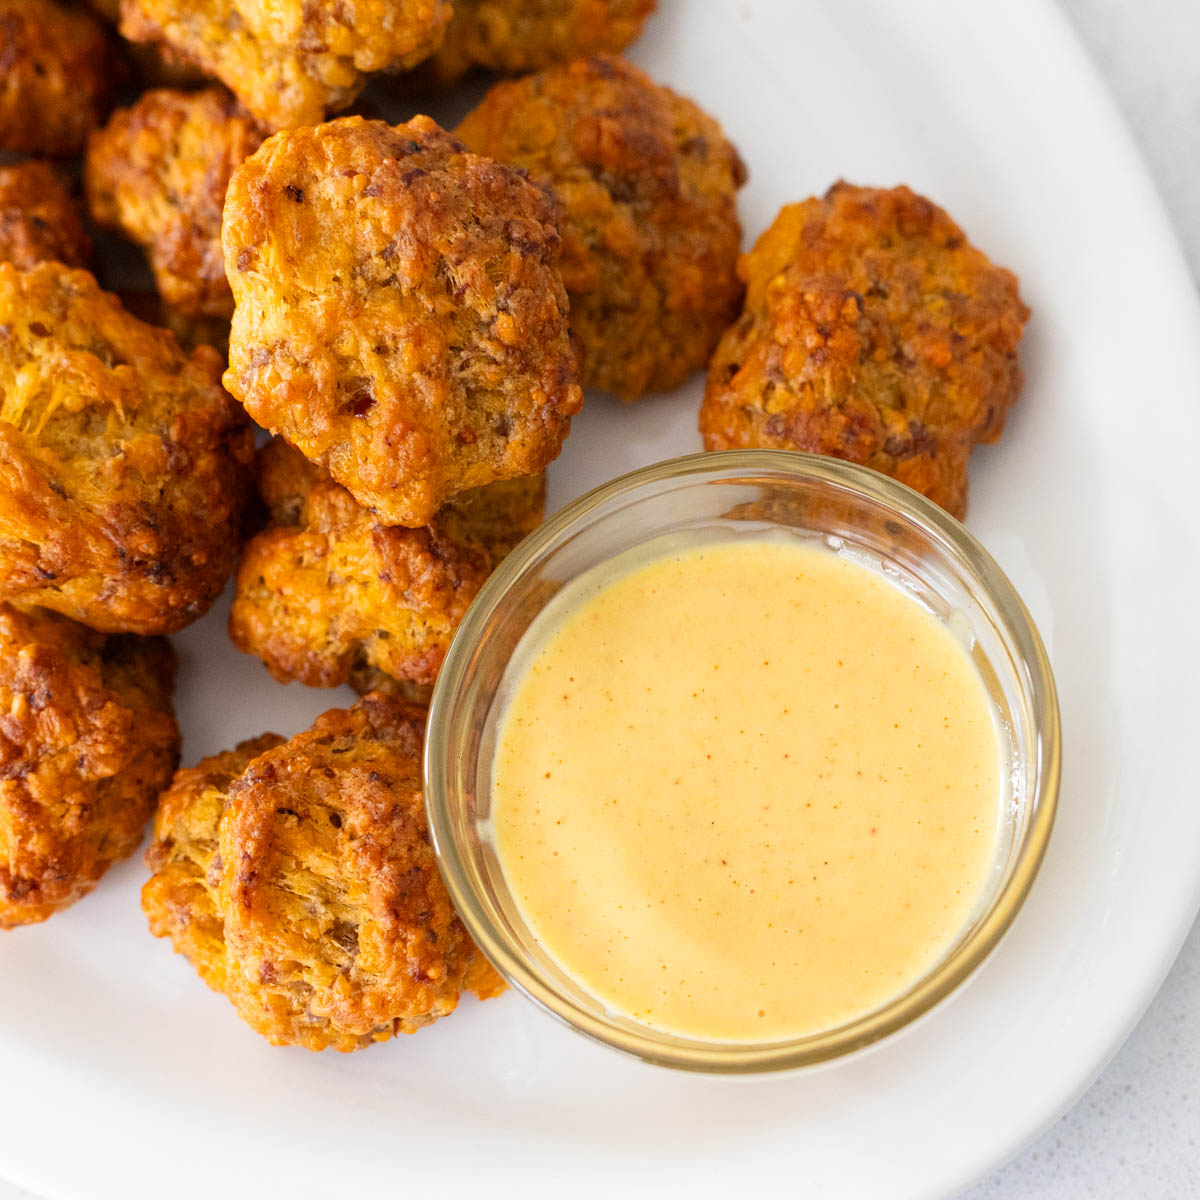 The small cup of honey mustard dip is set on a platter of homemade sausage balls.